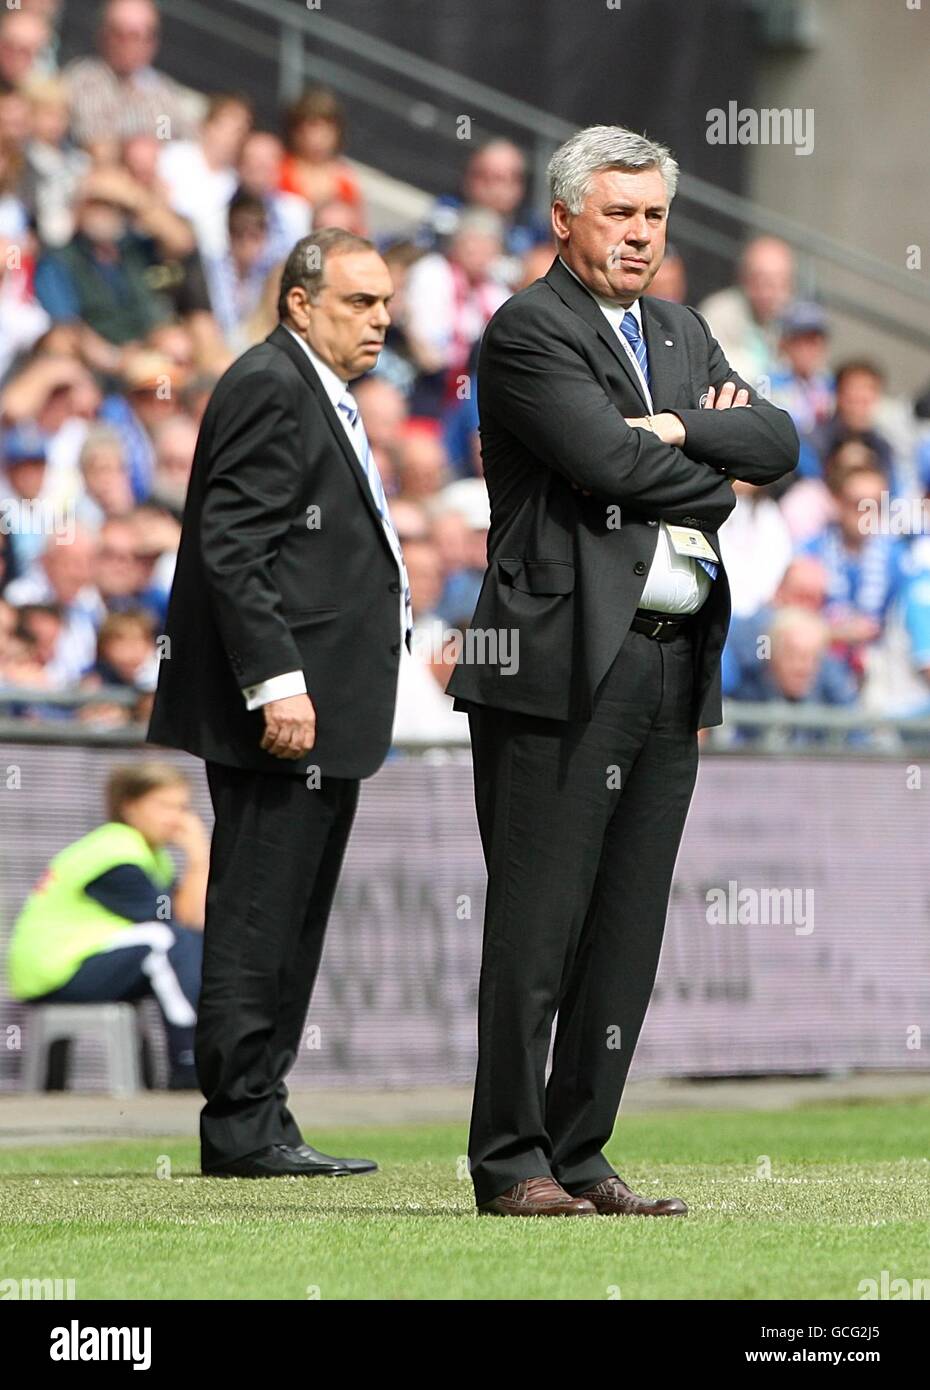 Portsmouth manager Avram Grant (left) and Chelsea manager Carlo Ancelotti (right) on the touchline. Stock Photo